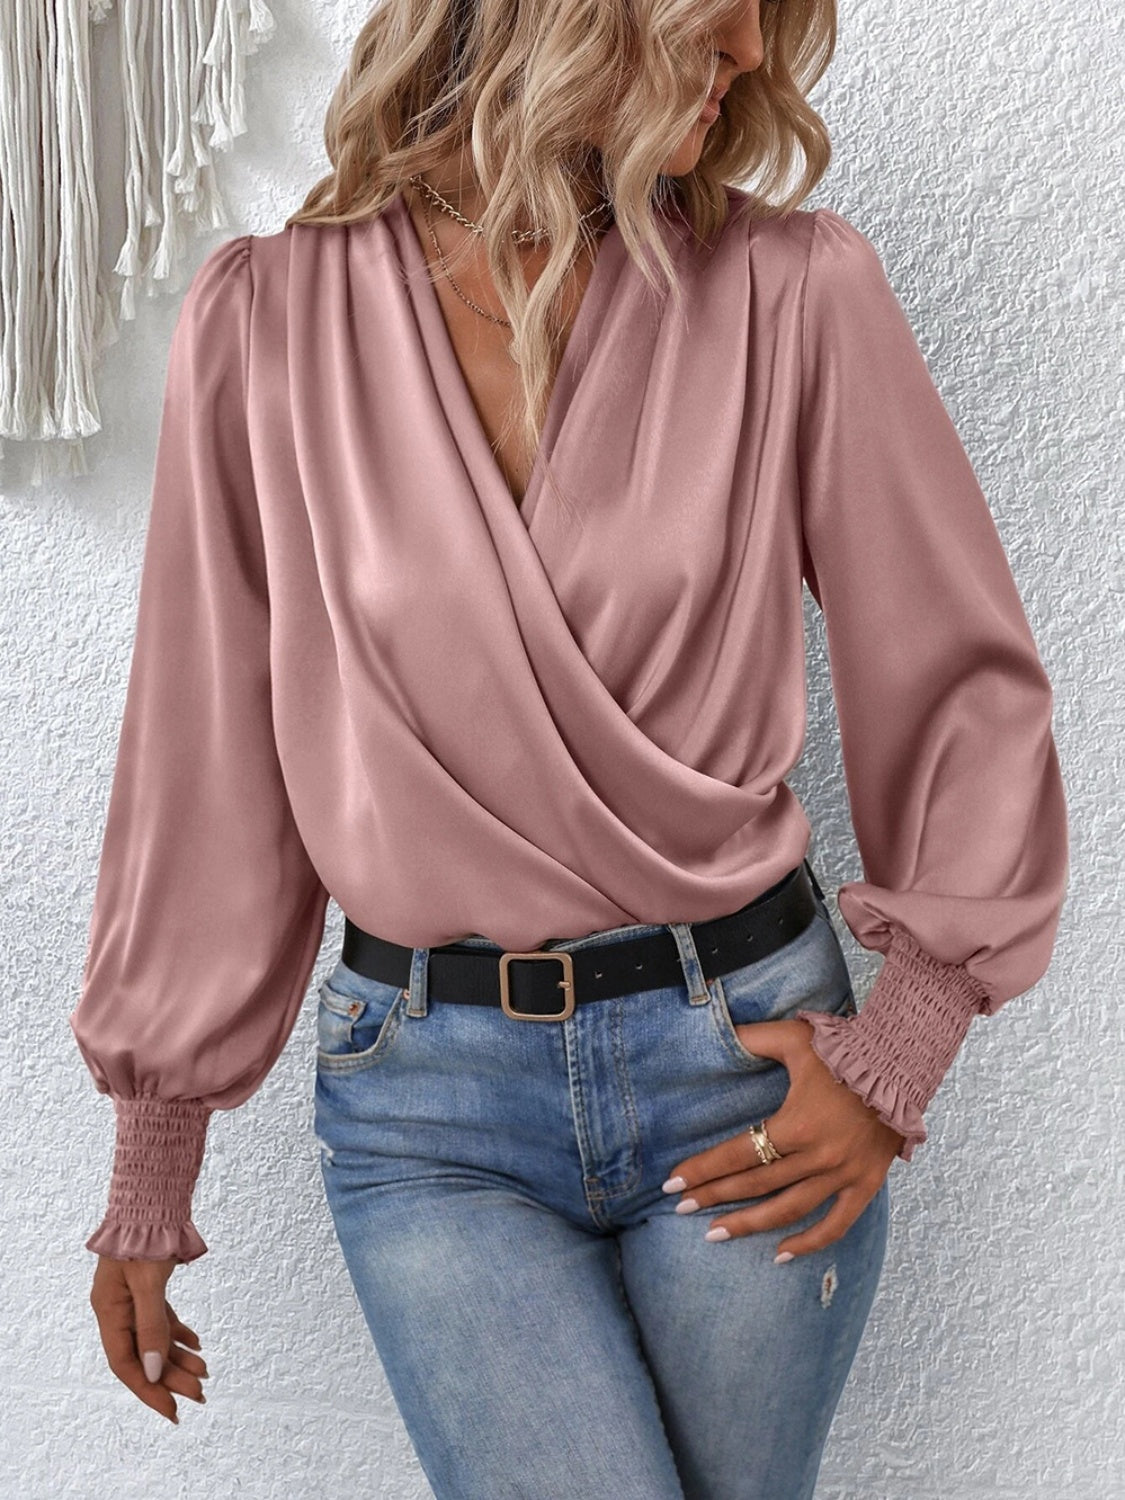 Surplice Smocked Lantern Sleeve Blouse - Women’s Clothing & Accessories - Shirts & Tops - 12 - 2024